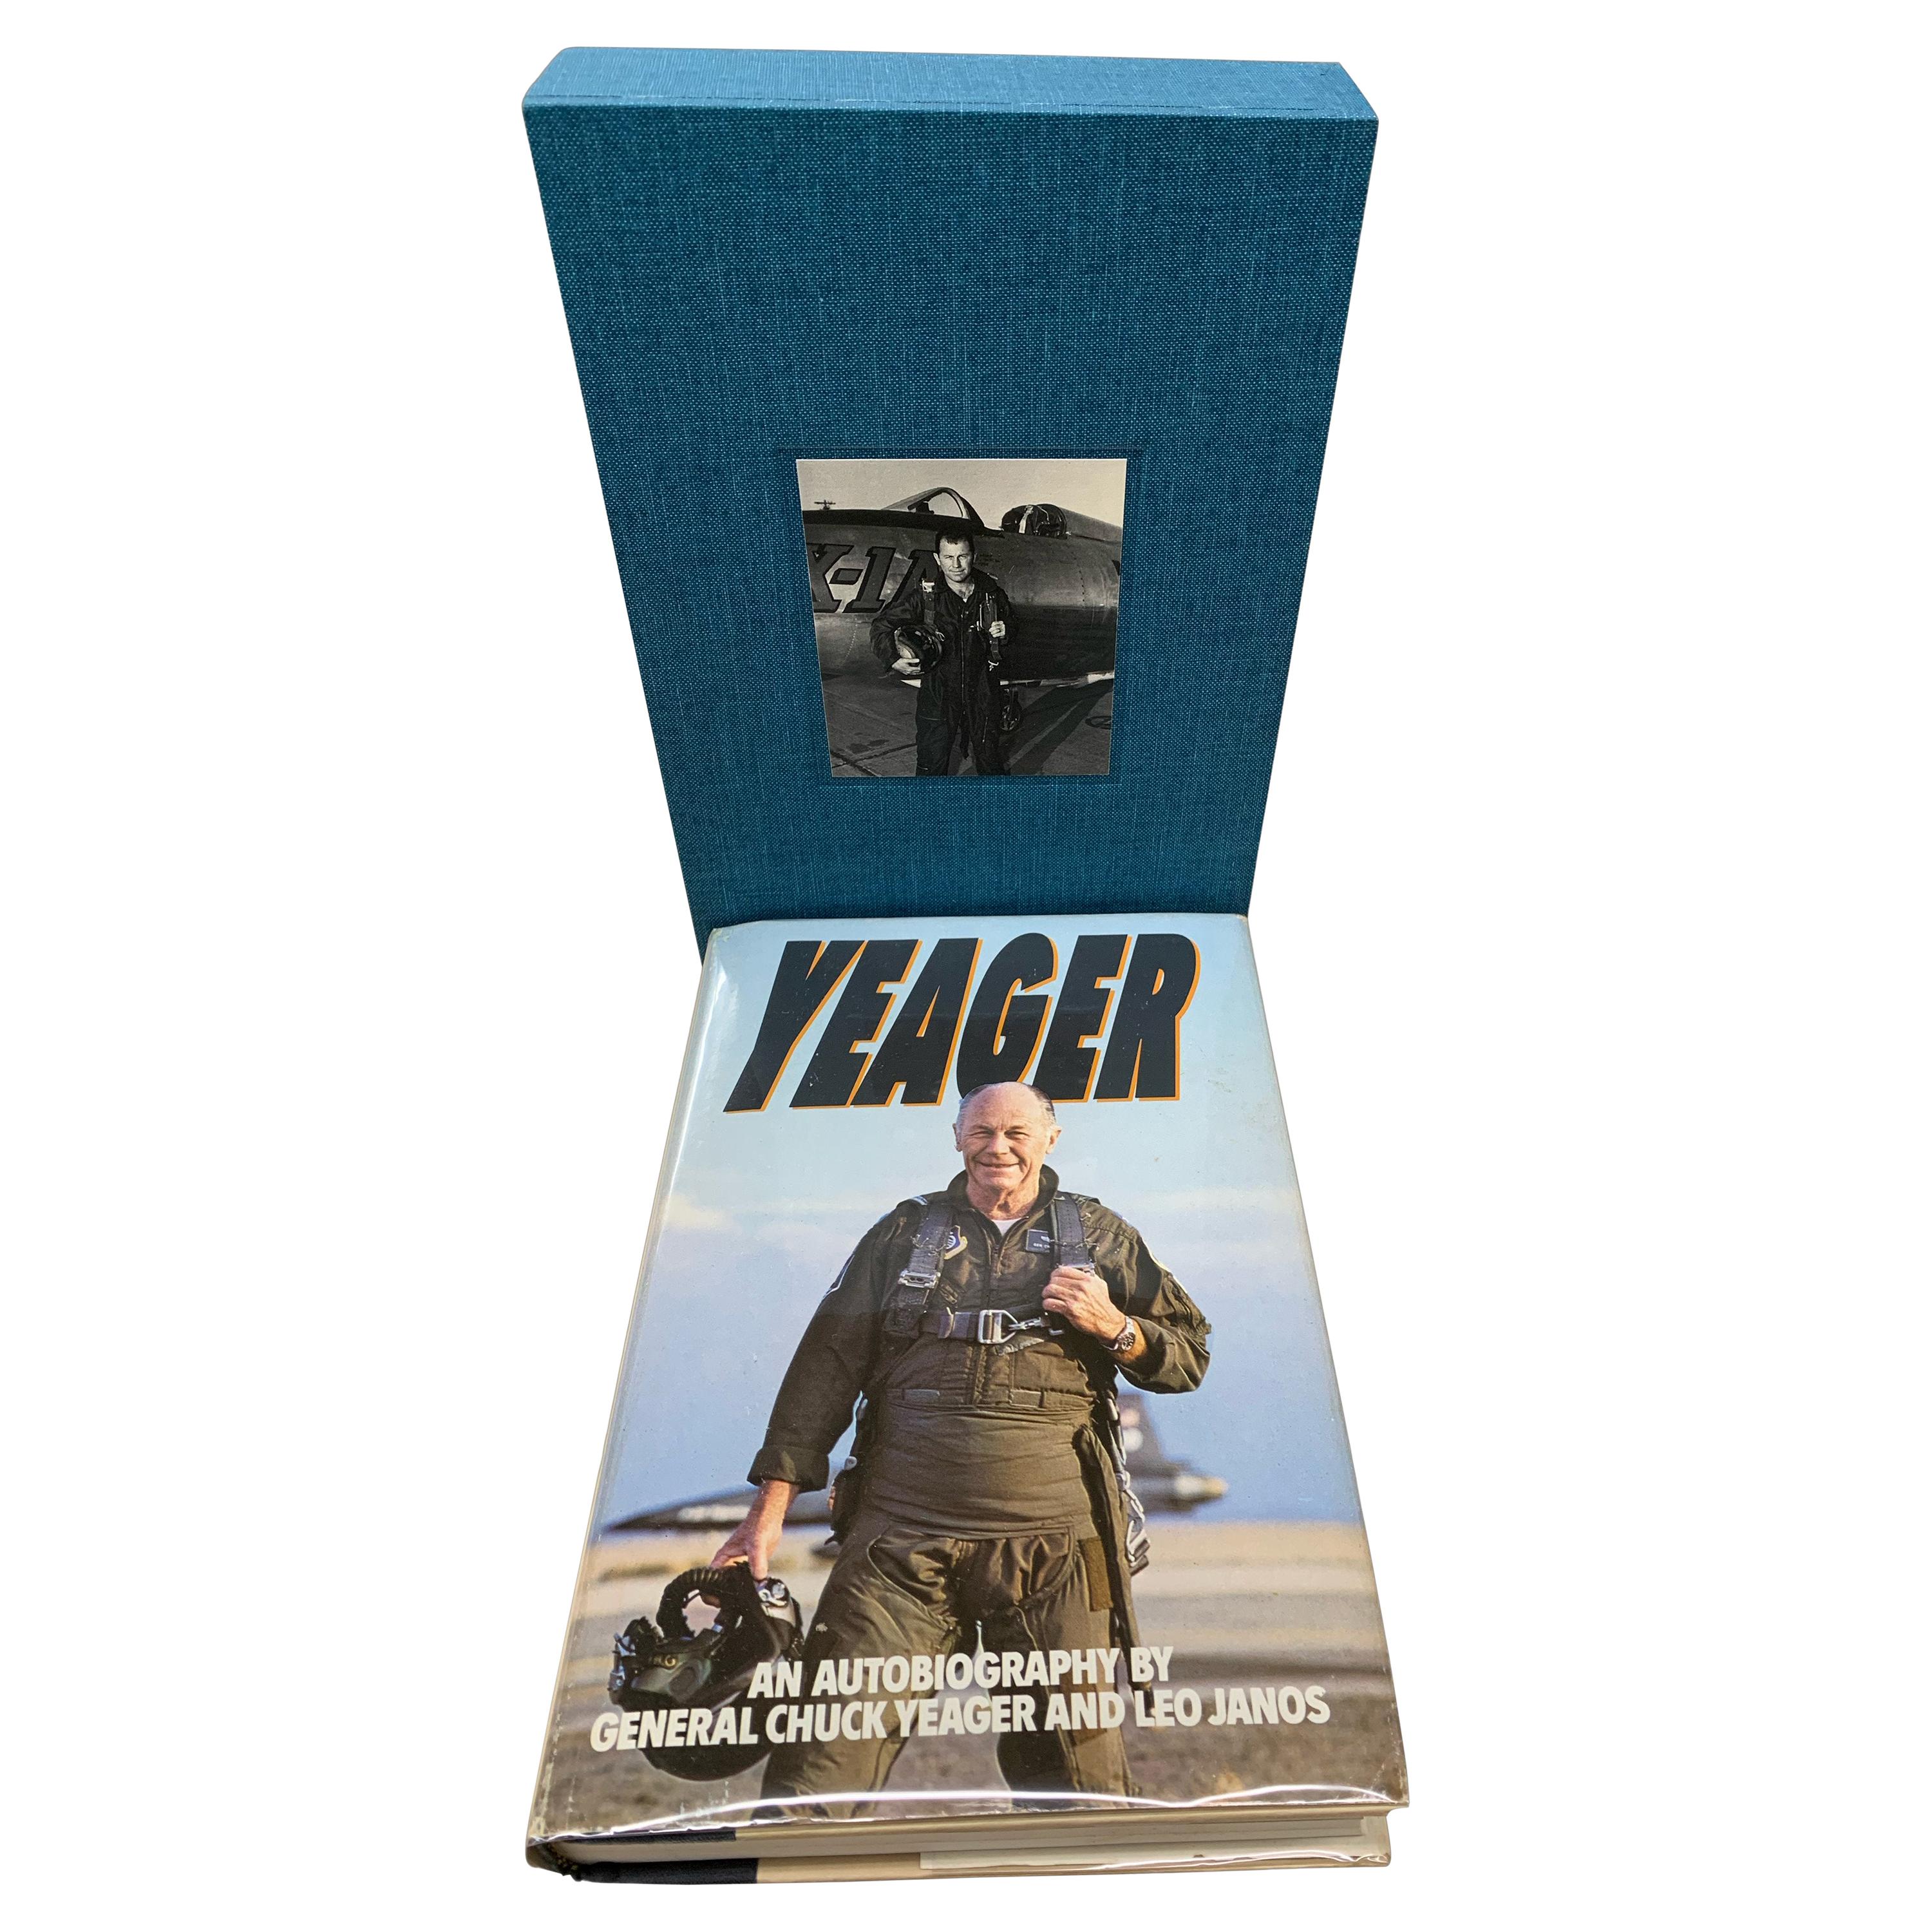 Yeager, An Autobiography by Chuck Yeager and Leo Janos, Signed by Chuck Yeager